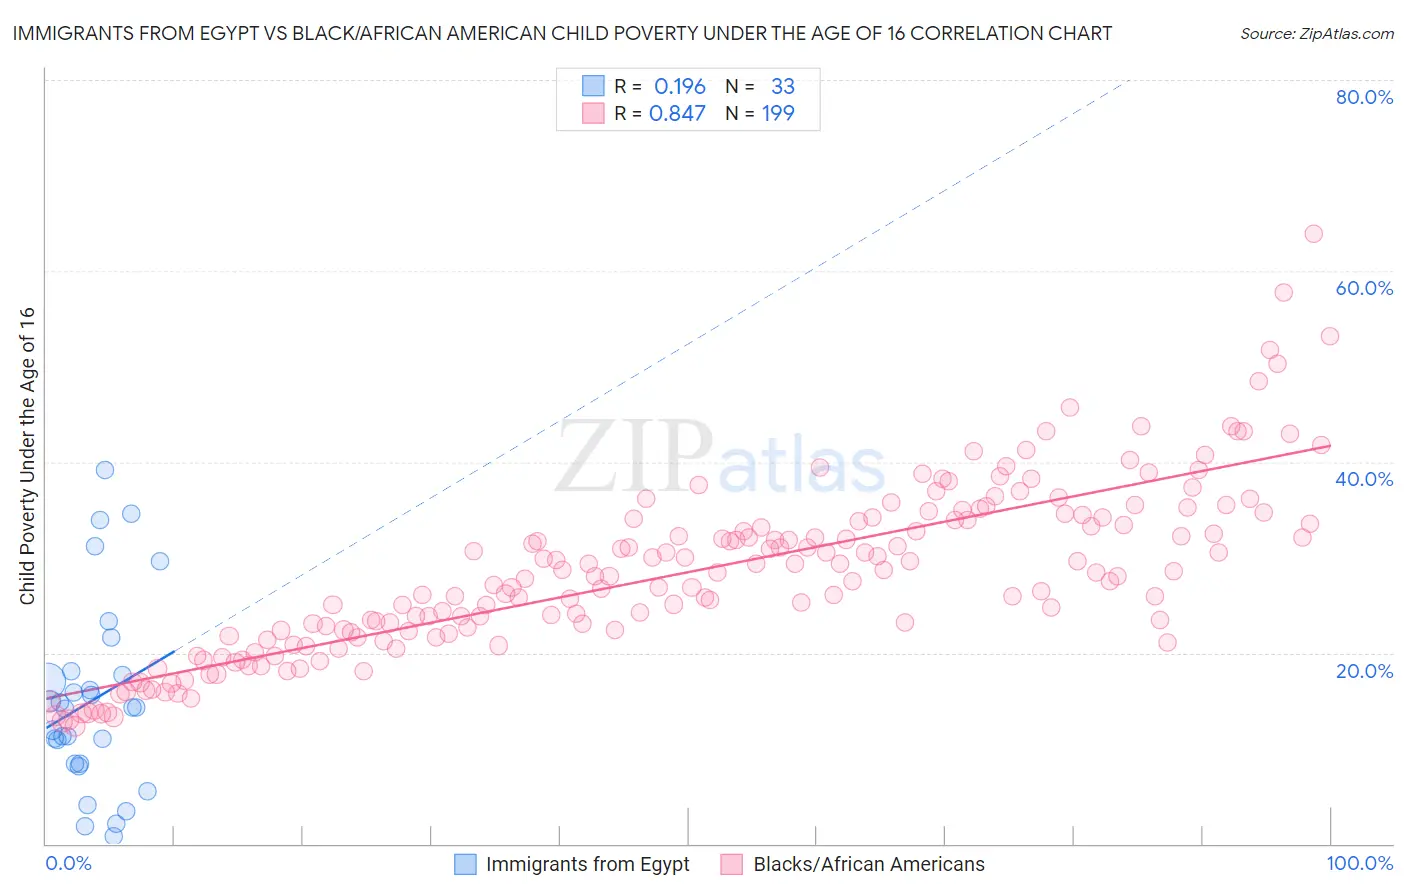 Immigrants from Egypt vs Black/African American Child Poverty Under the Age of 16